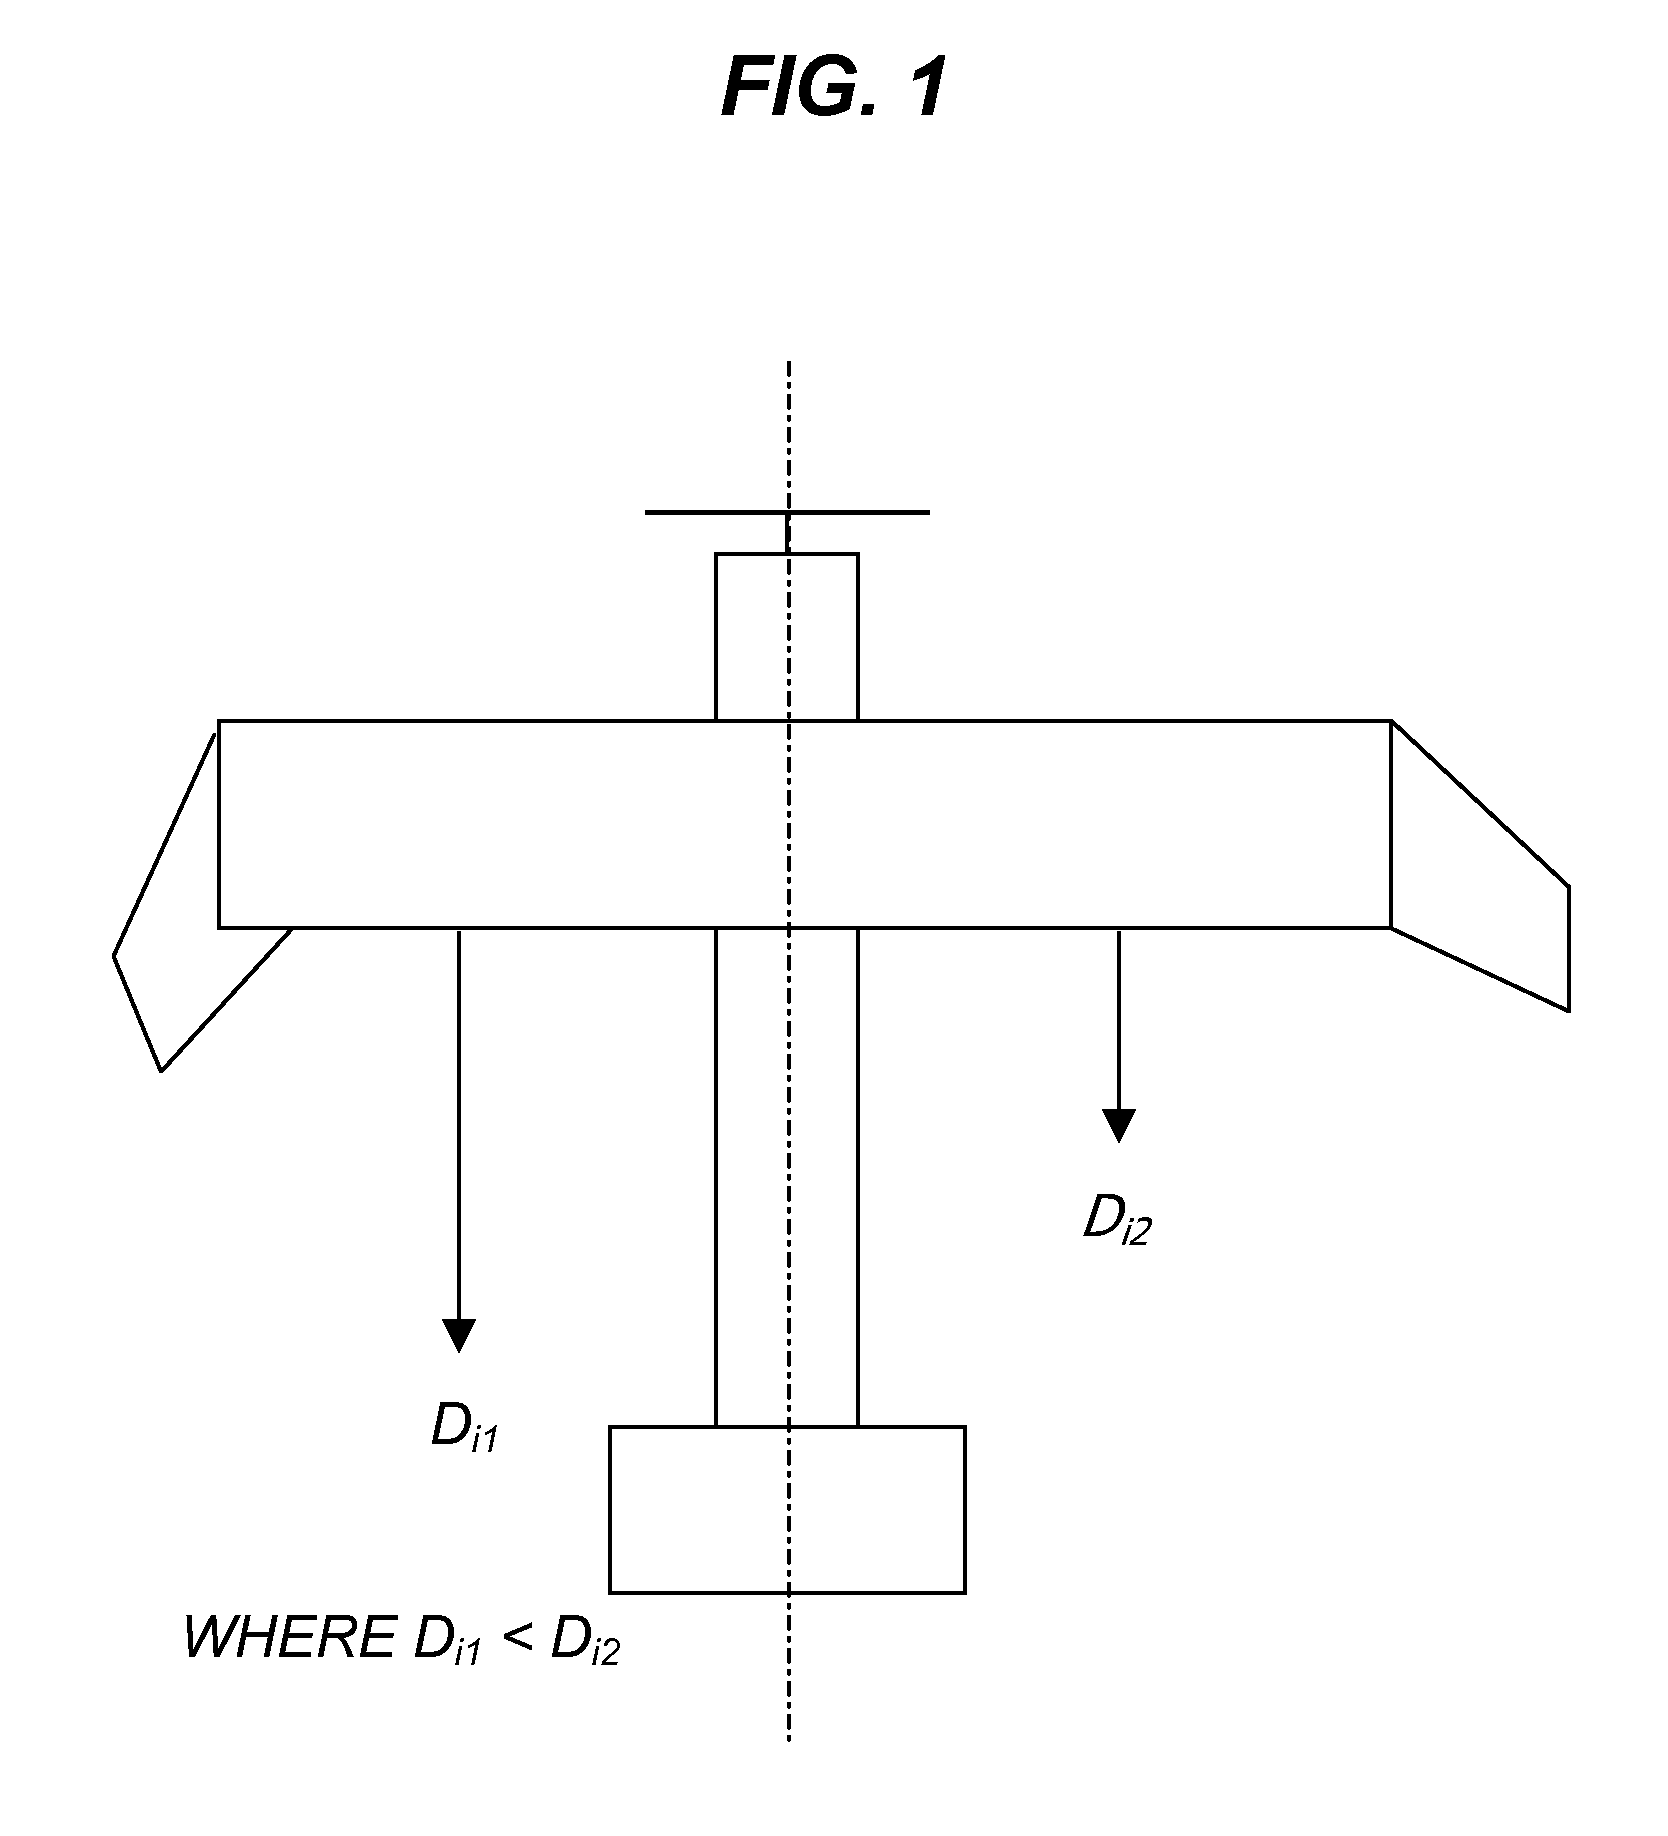 Flight control method and apparatus to produce induced yaw